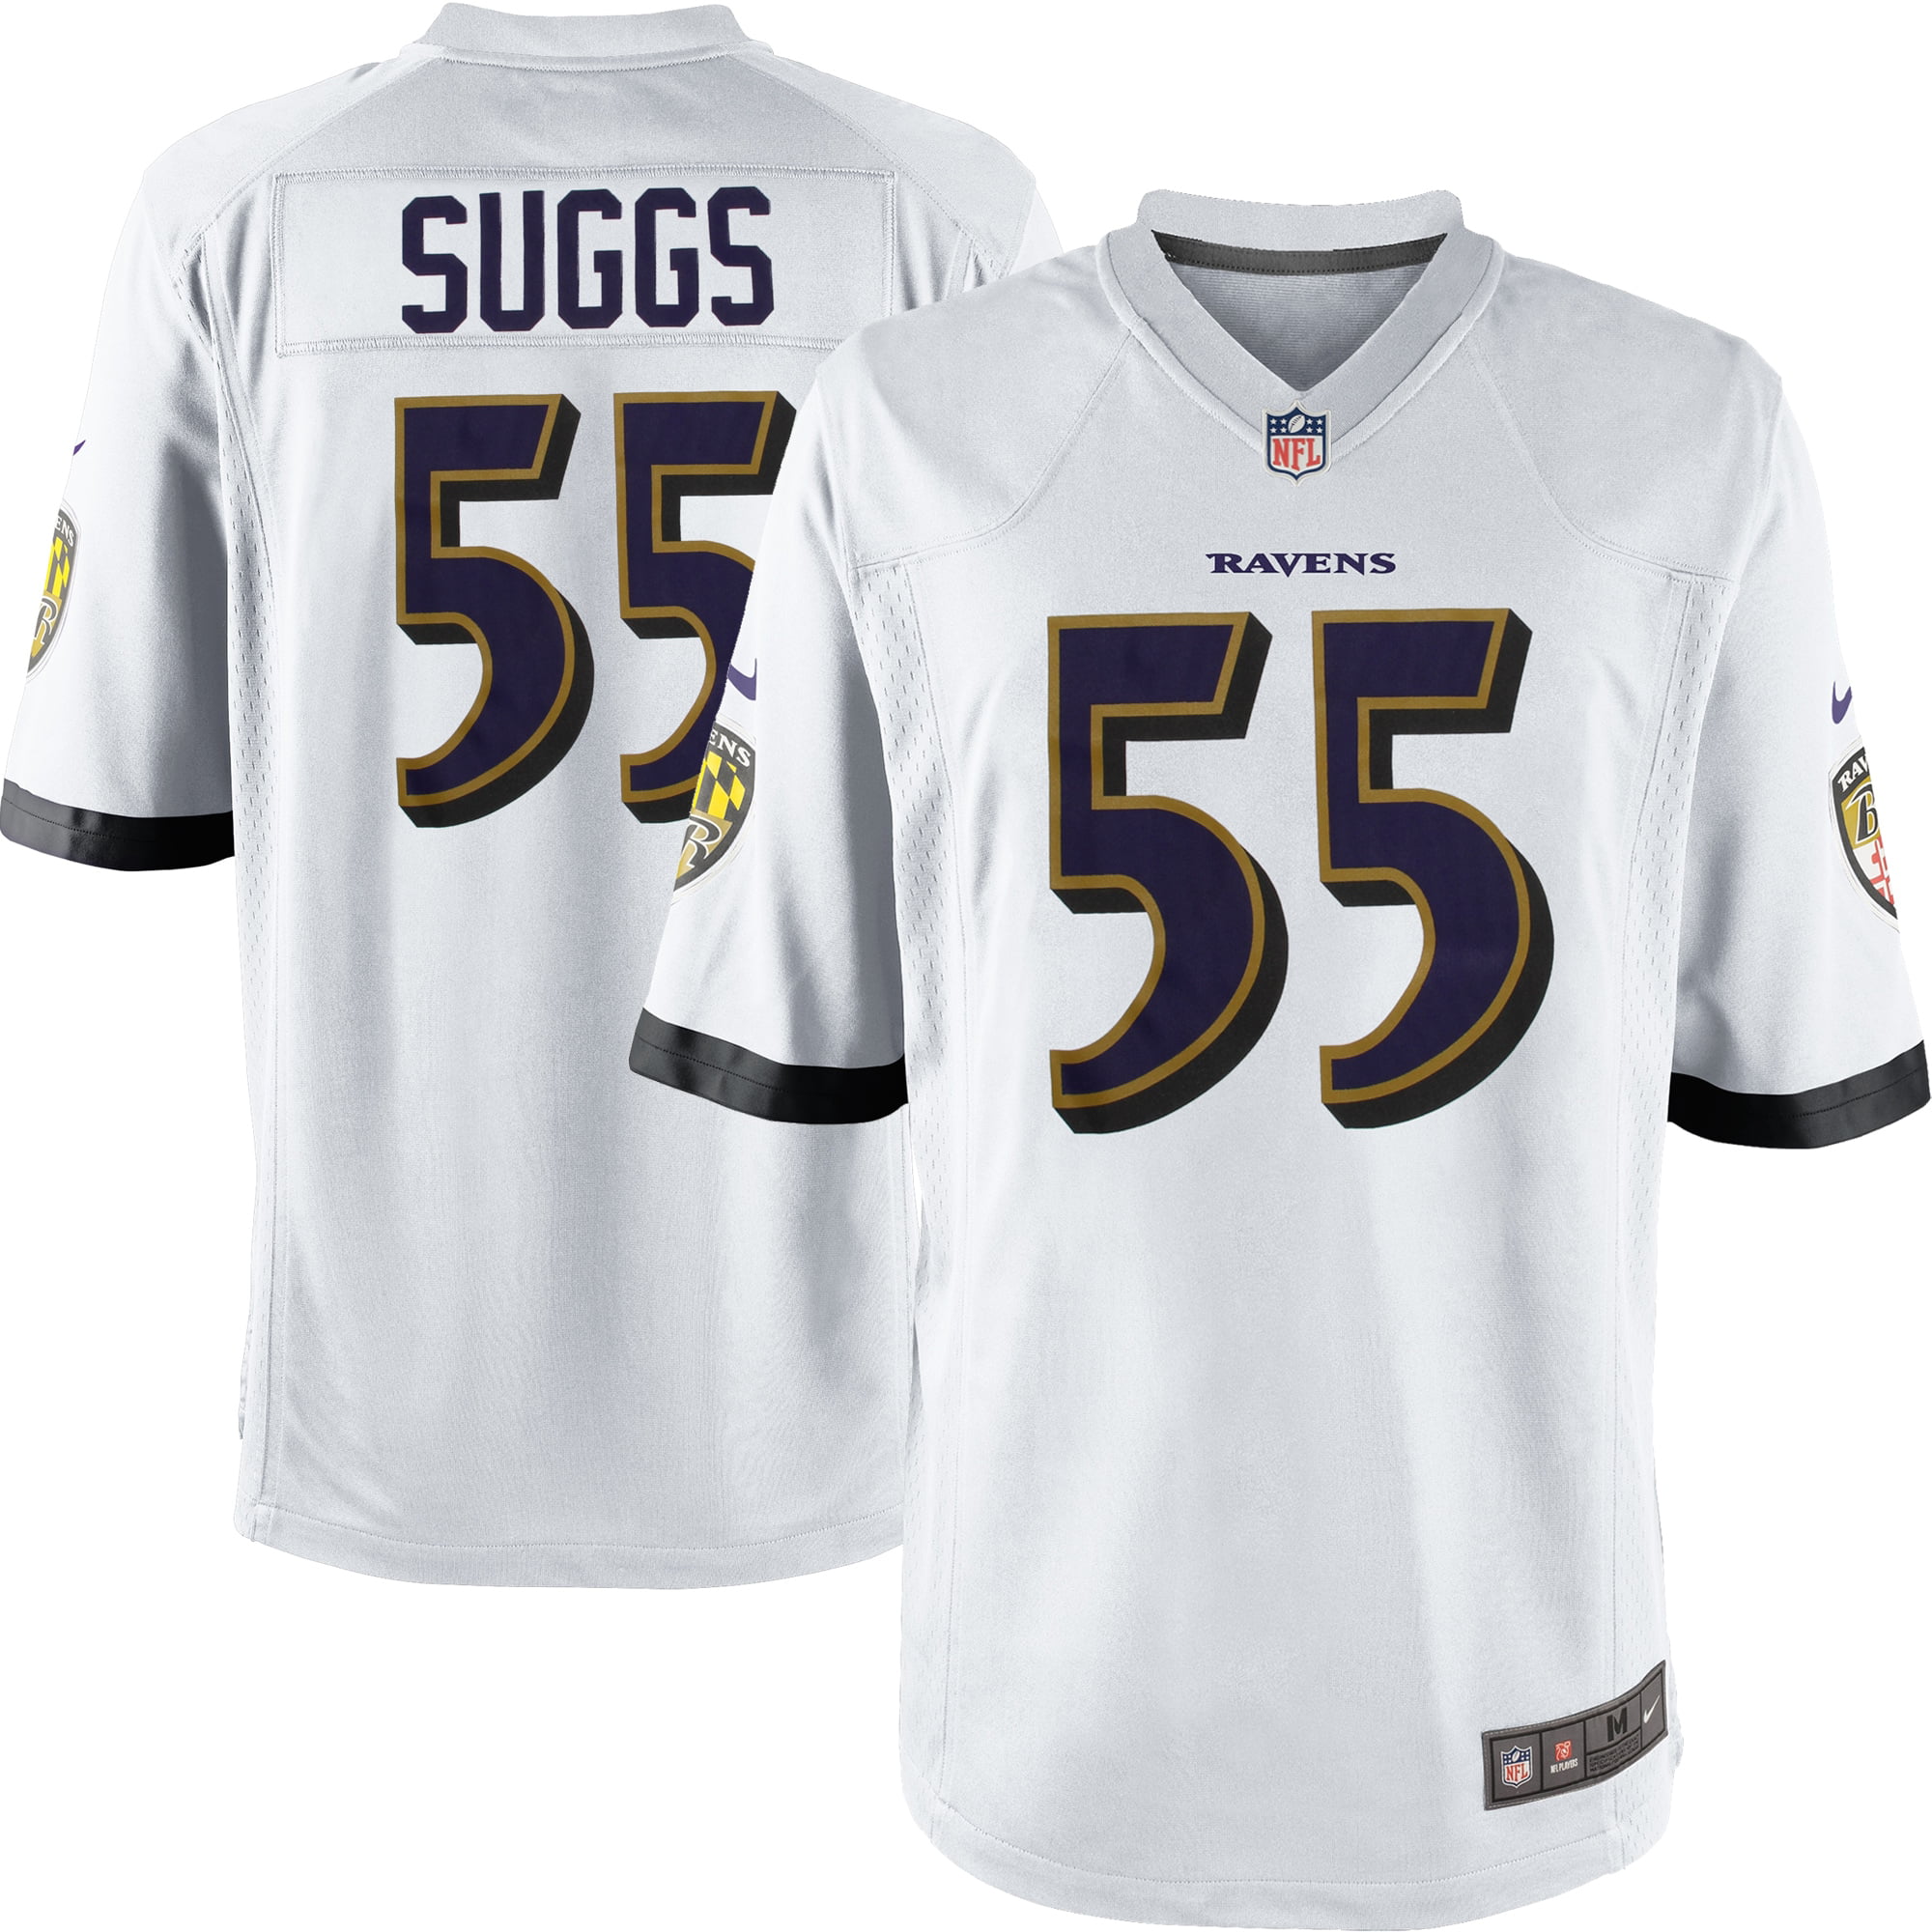 Terrell Suggs NFL Jersey